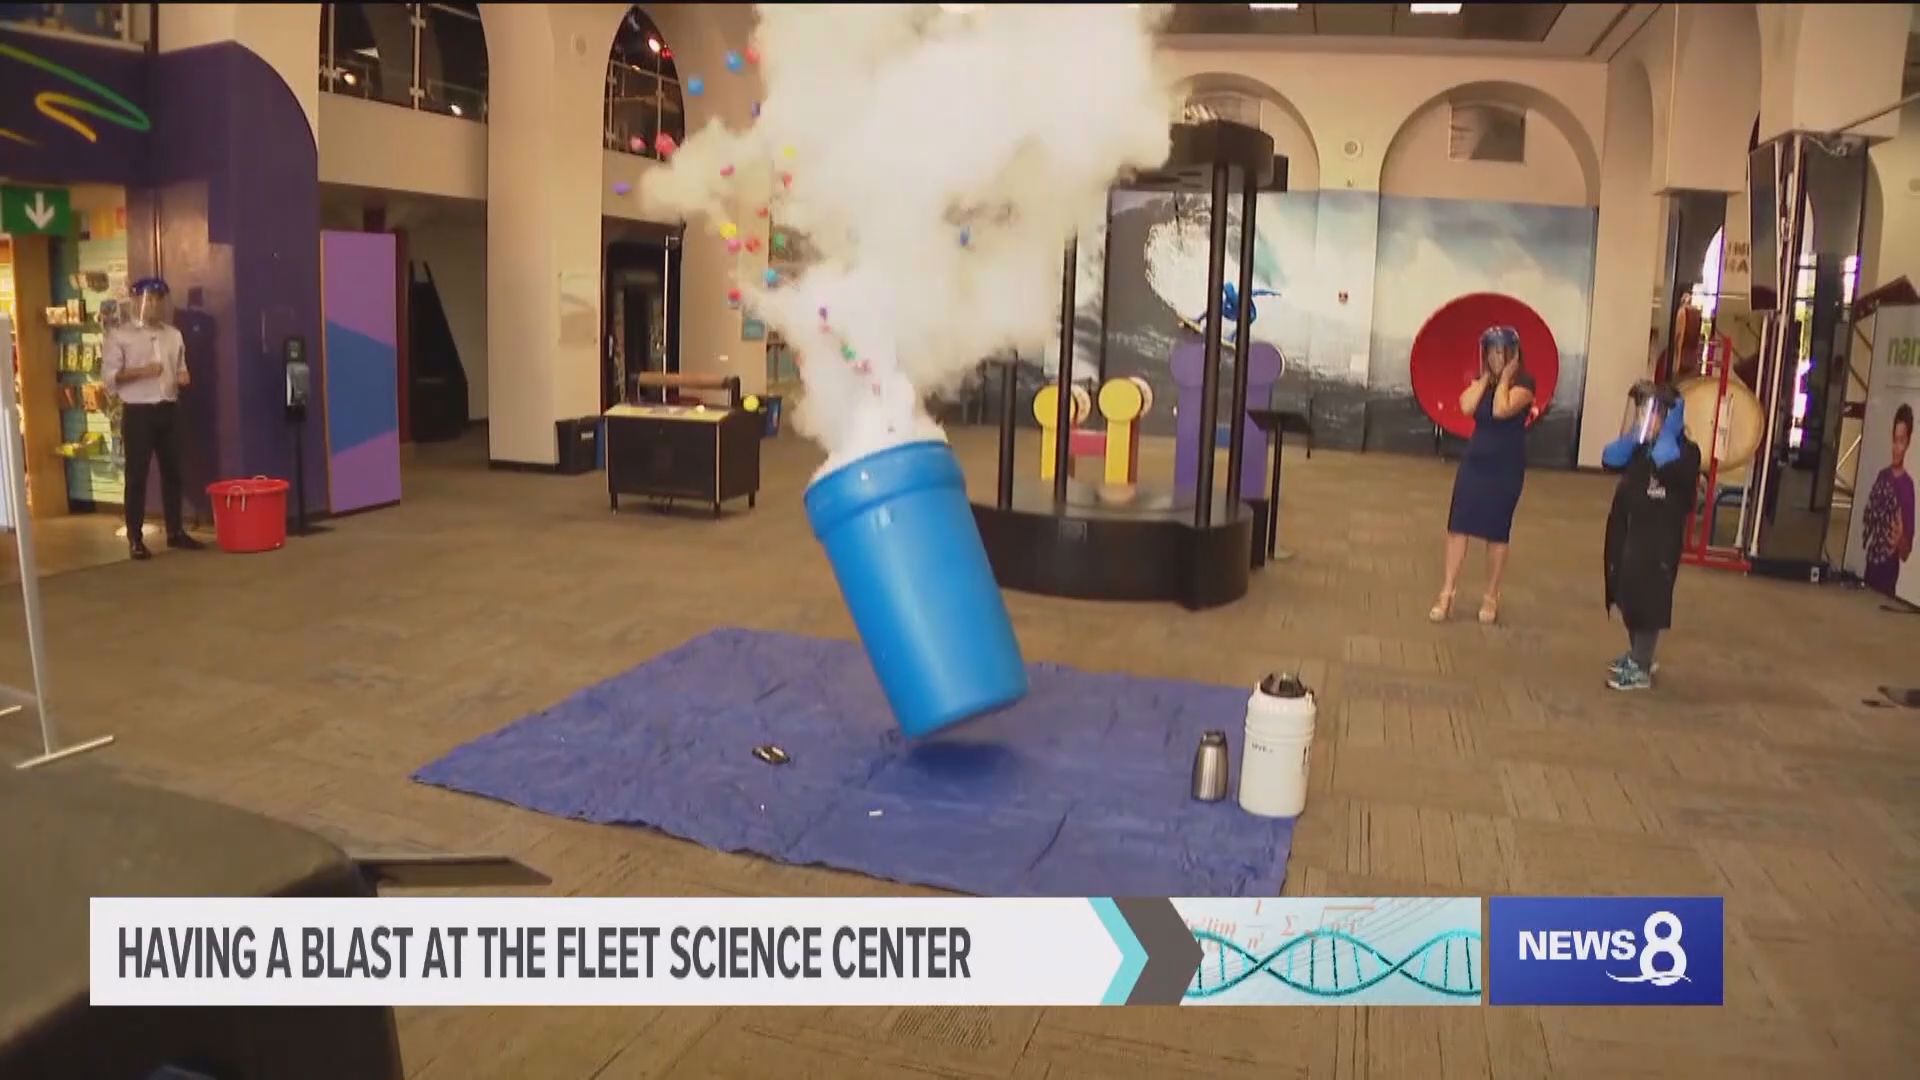 For our special, "Full Steam Ahead," CBS 8's Neda Iranpour and Evan Noorani took a trip to the Fleet Science Center in Balboa Park and had a literal blast!